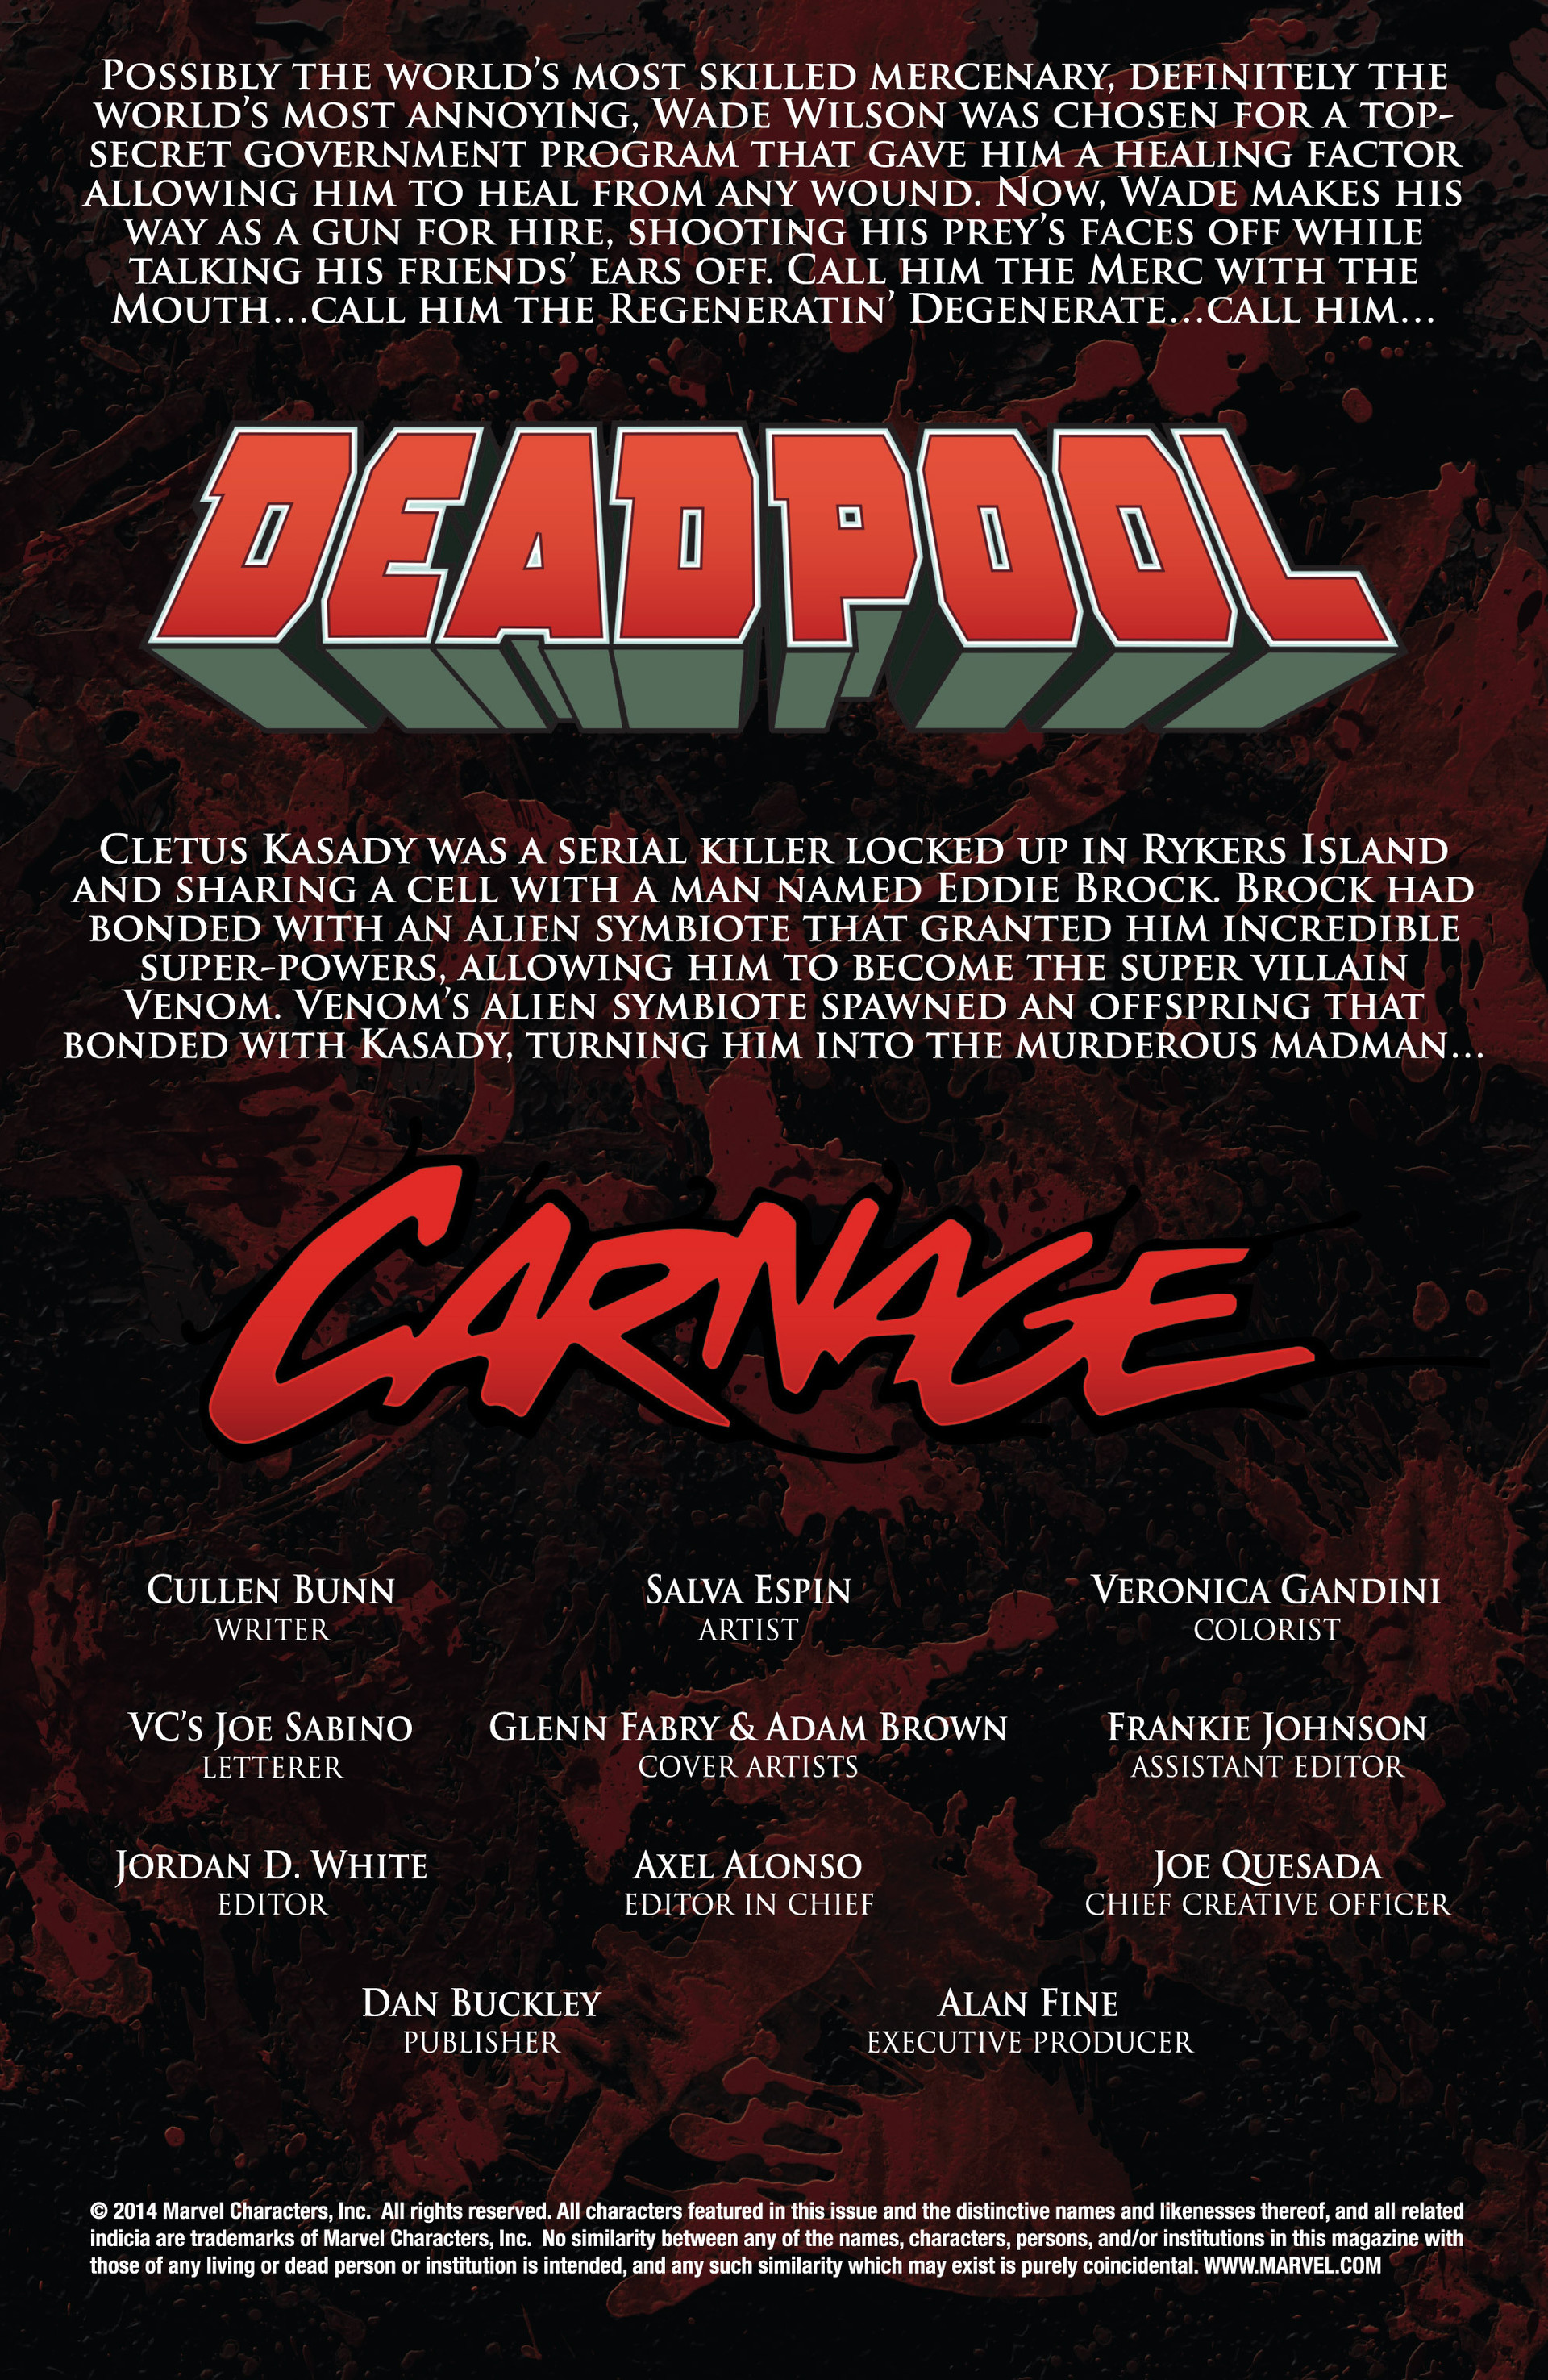 Read online Deadpool vs. Carnage comic -  Issue #1 - 2